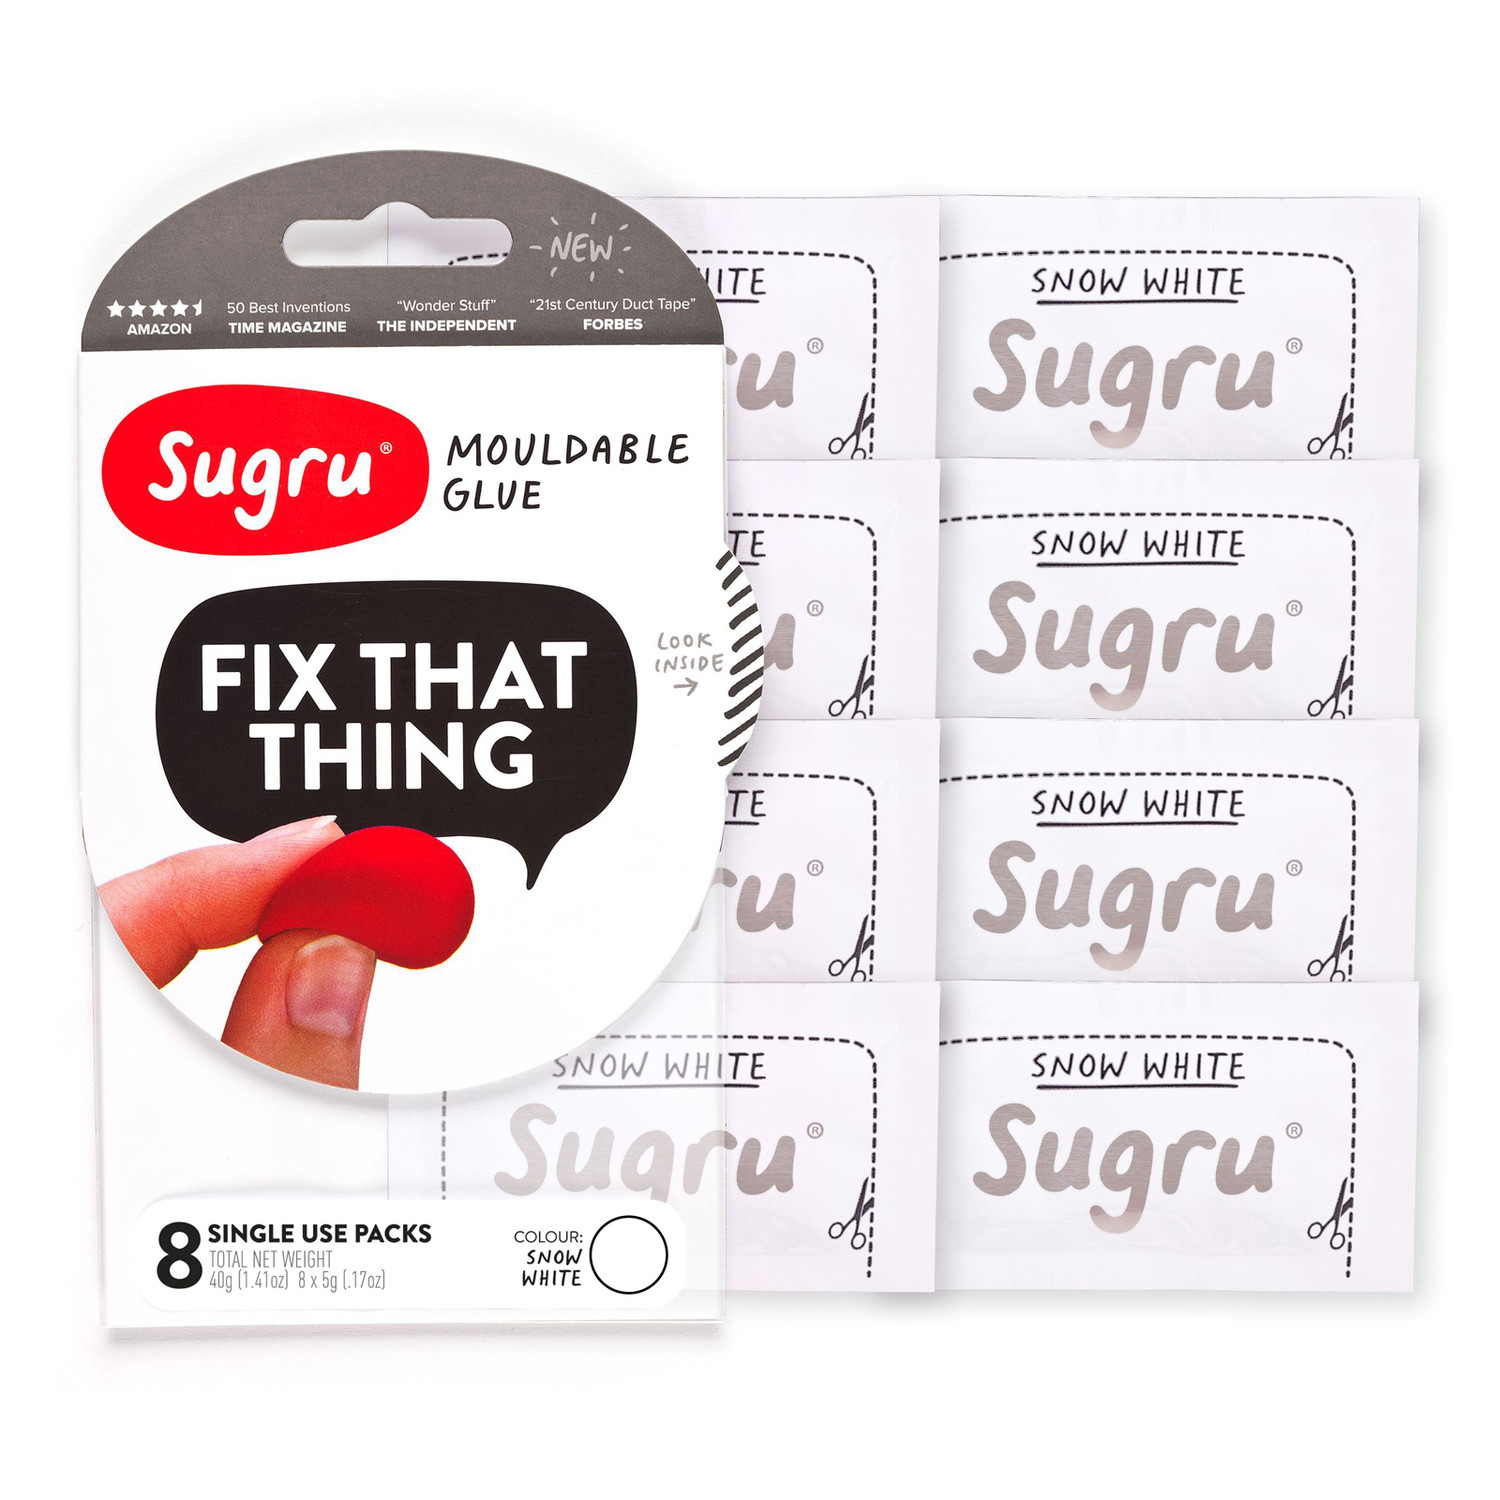 SUGRU WORLD'S FIRST MOULDABLE GLUE 